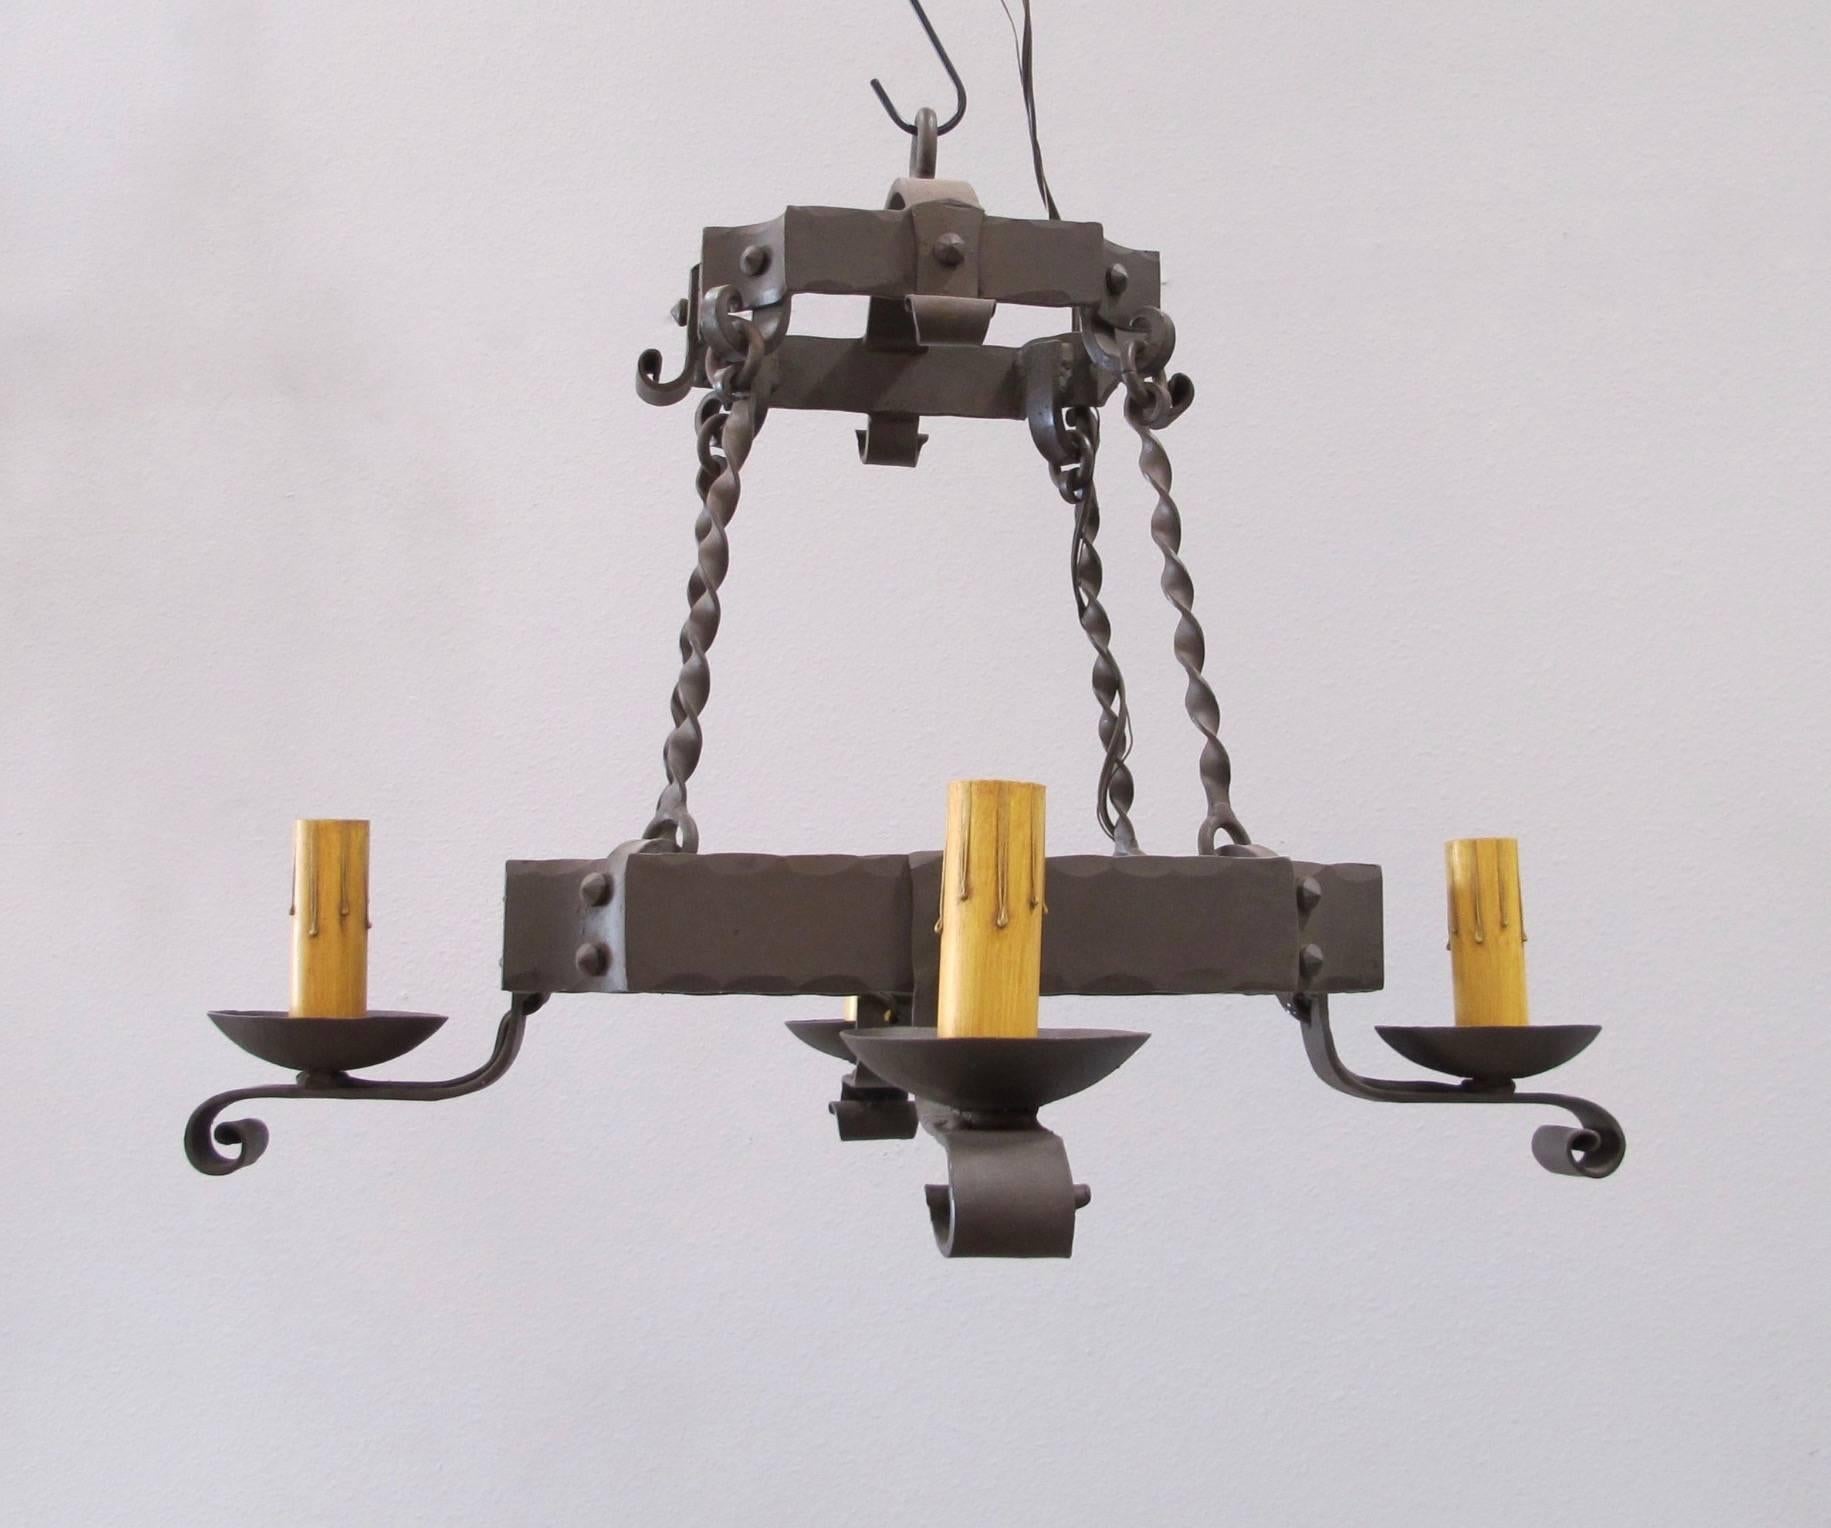 Hand-forged small iron chandelier with four lights. Medium base bulb up to 60 watts/socket. Aged iron finish. UL Listed, chain and canopy included. Courtesy to the trade.